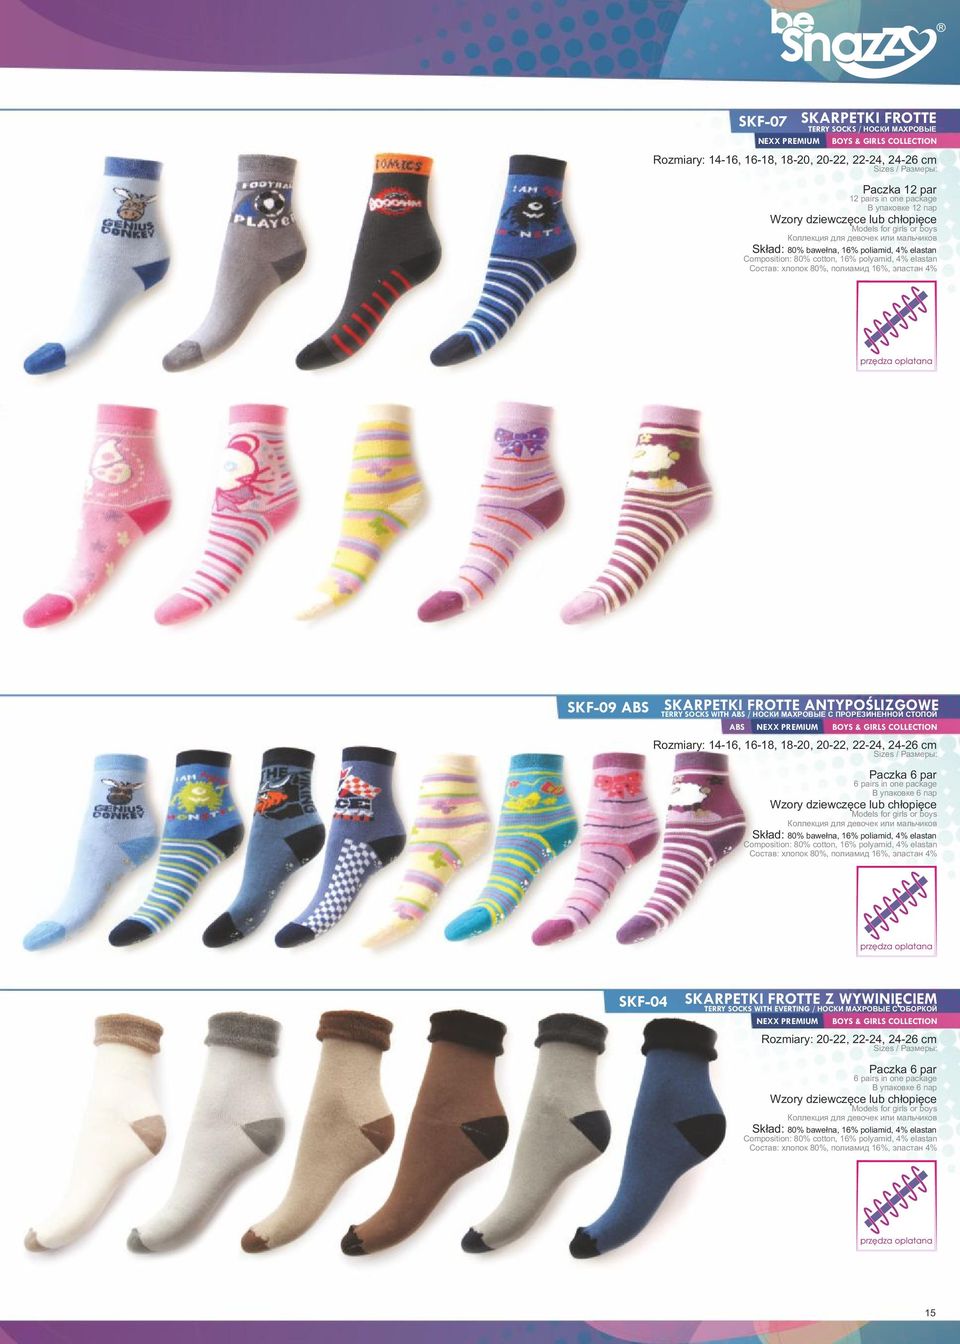 22-24, 24-26 cm Paczka 6 par 6 pairs in one package В упаковке 6 пар Models for girls or boys SKF-04 SKARPETKI FROTTE Z WYWINIĘCIEM TERRY SOCKS WITH EVERTING